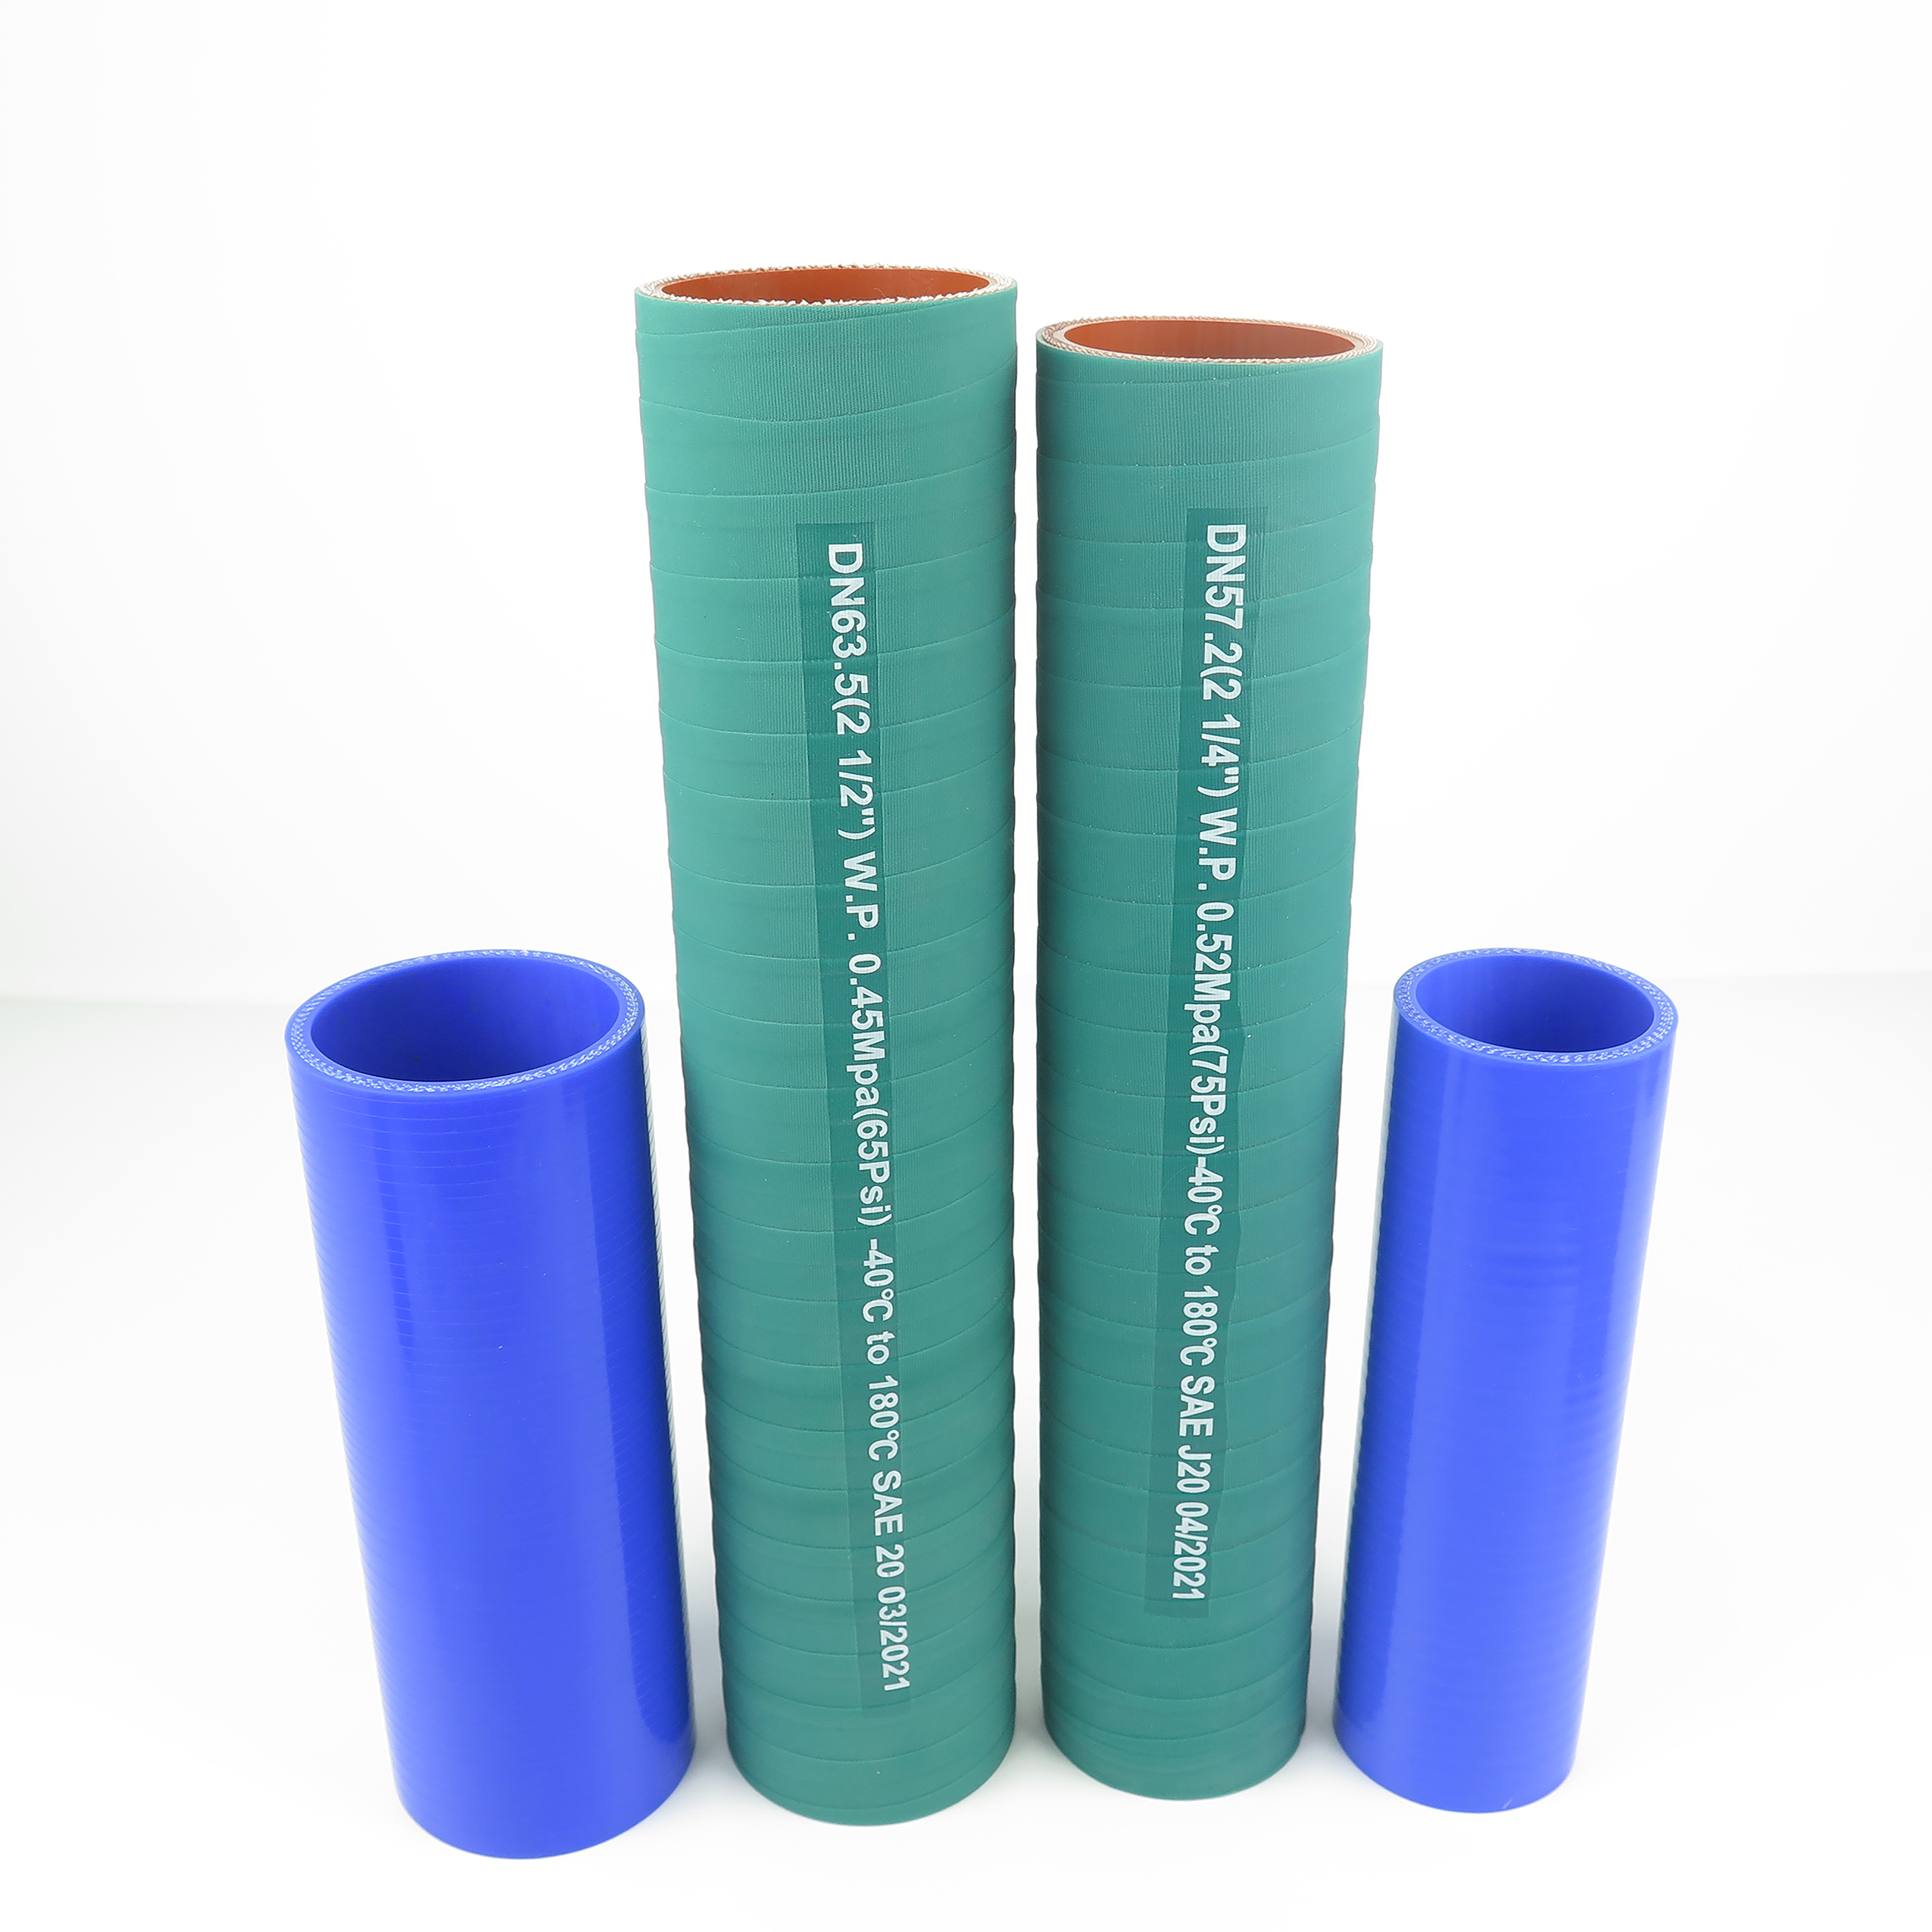 Silicone hose is upgraded, new products are constant